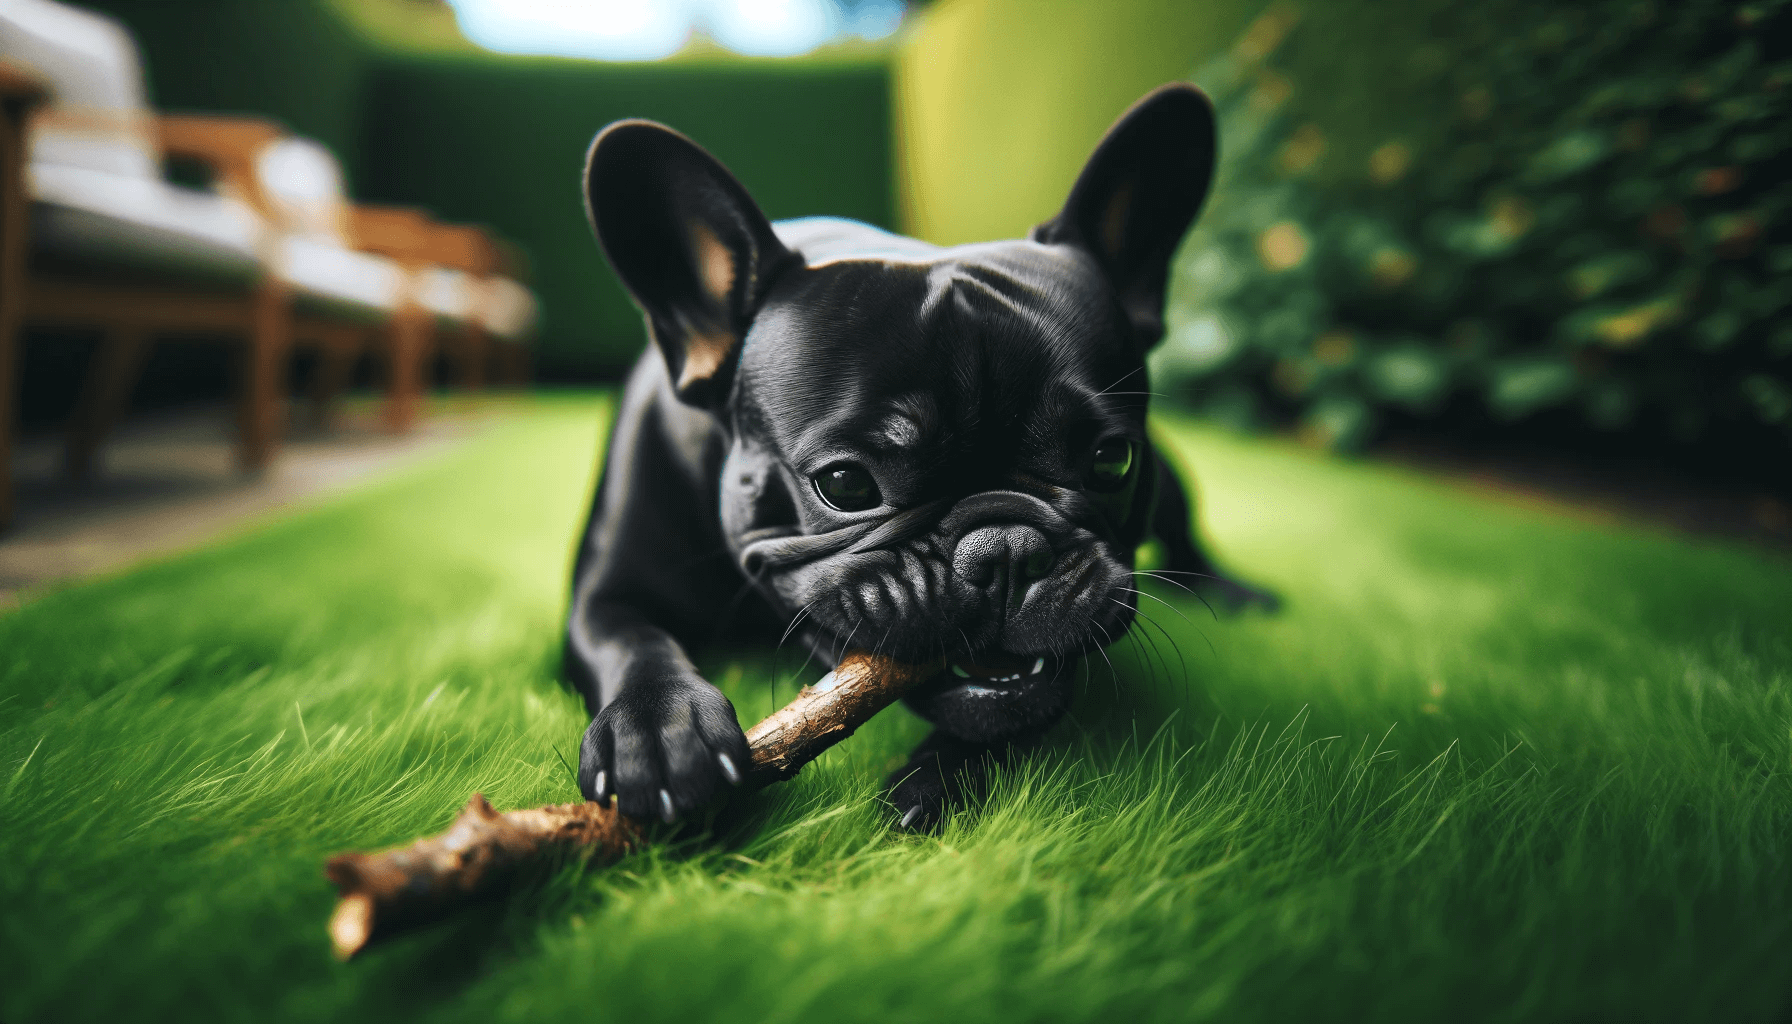 Black French Bulldog Chews on a Stick in a Moment of Play on a Well-maintained Lawn